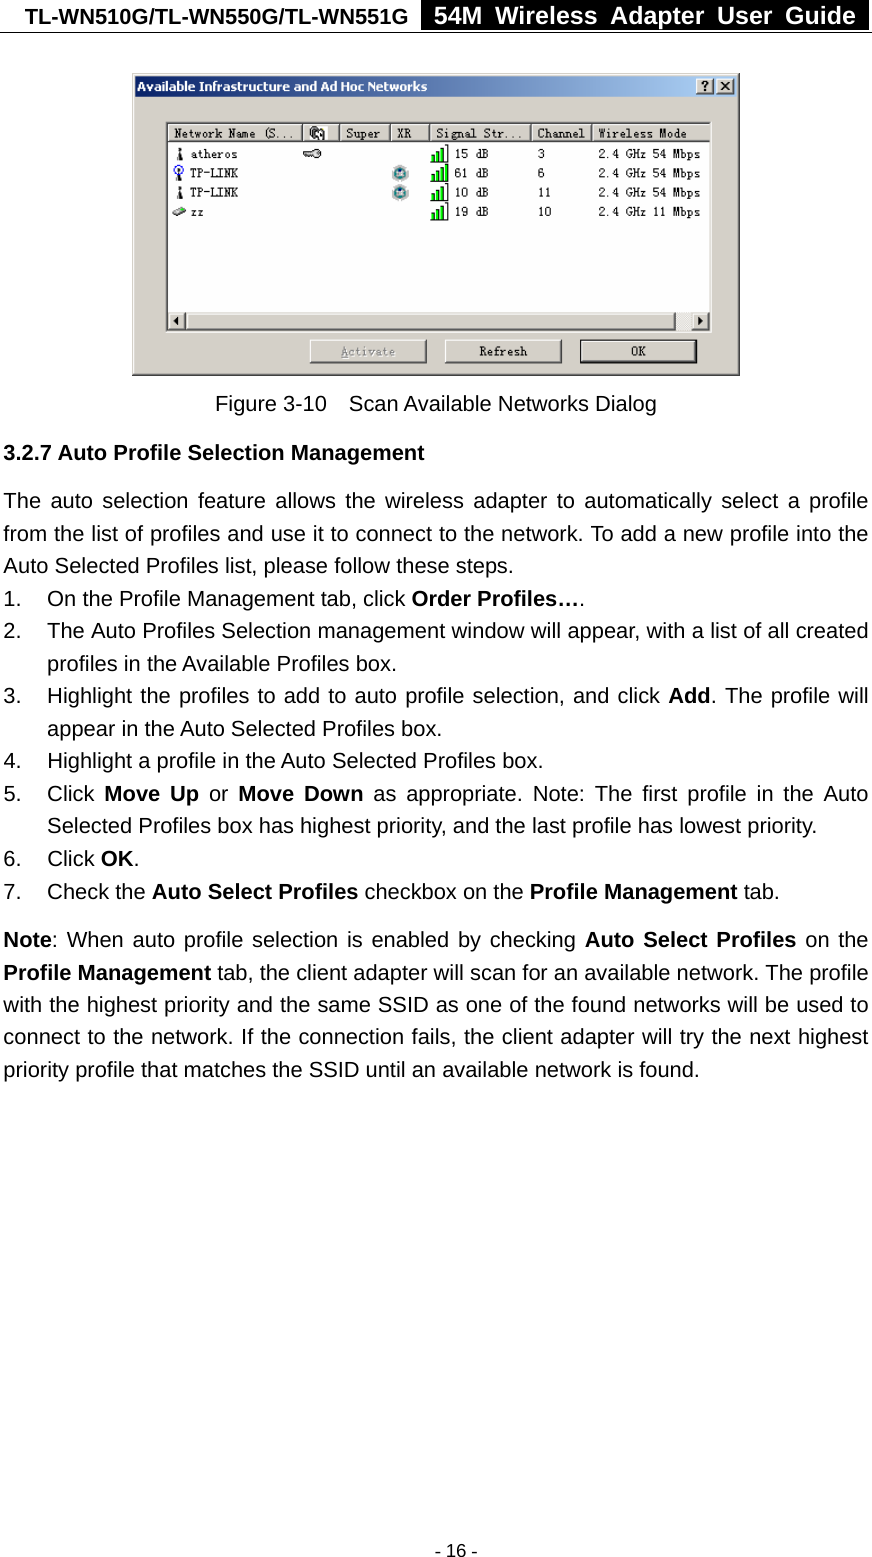 TL-WN510G/TL-WN550G/TL-WN551G  54M Wireless Adapter User Guide   Figure 3-10    Scan Available Networks Dialog 3.2.7 Auto Profile Selection Management The auto selection feature allows the wireless adapter to automatically select a profile from the list of profiles and use it to connect to the network. To add a new profile into the Auto Selected Profiles list, please follow these steps. 1.  On the Profile Management tab, click Order Profiles…. 2.  The Auto Profiles Selection management window will appear, with a list of all created profiles in the Available Profiles box. 3.  Highlight the profiles to add to auto profile selection, and click Add. The profile will appear in the Auto Selected Profiles box. 4.  Highlight a profile in the Auto Selected Profiles box. 5. Click Move Up or Move Down as appropriate. Note: The first profile in the Auto Selected Profiles box has highest priority, and the last profile has lowest priority. 6. Click OK. 7. Check the Auto Select Profiles checkbox on the Profile Management tab. Note: When auto profile selection is enabled by checking Auto Select Profiles on the Profile Management tab, the client adapter will scan for an available network. The profile with the highest priority and the same SSID as one of the found networks will be used to connect to the network. If the connection fails, the client adapter will try the next highest priority profile that matches the SSID until an available network is found.  - 16 -